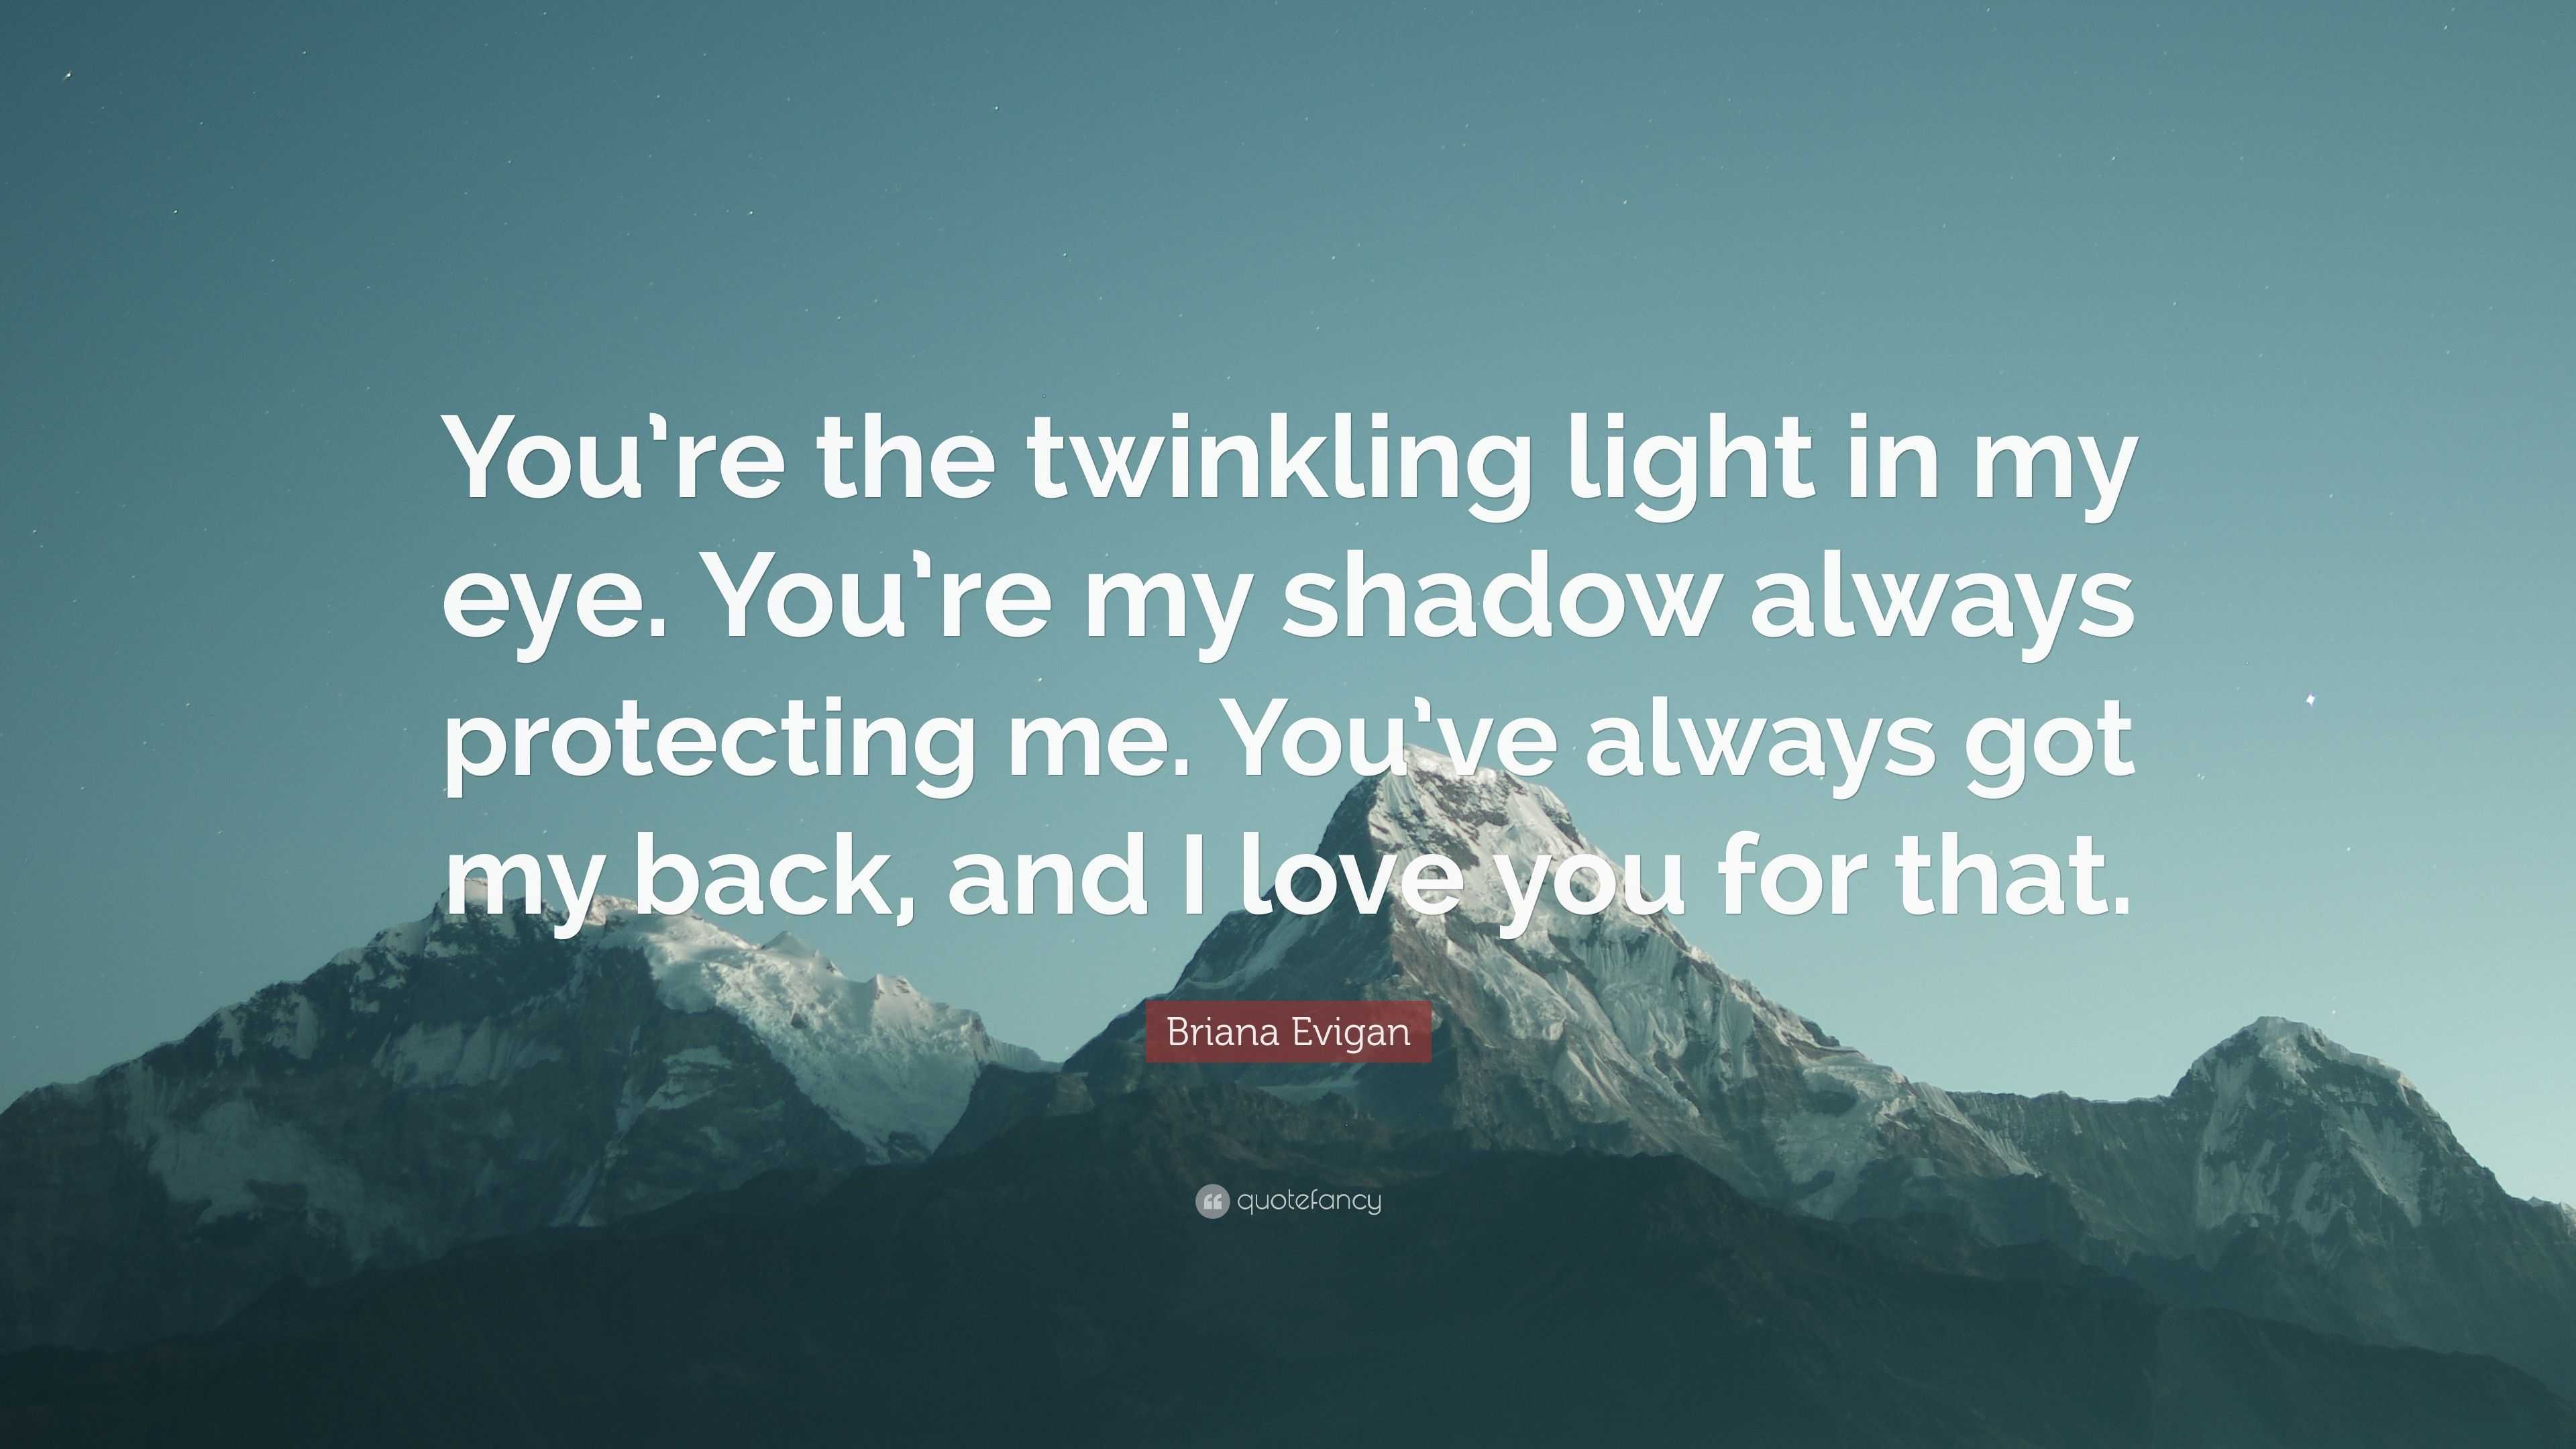 Briana Evigan Quote: “You're the twinkling light in my eye. You're my shadow always protecting me. You've always got back, I love you